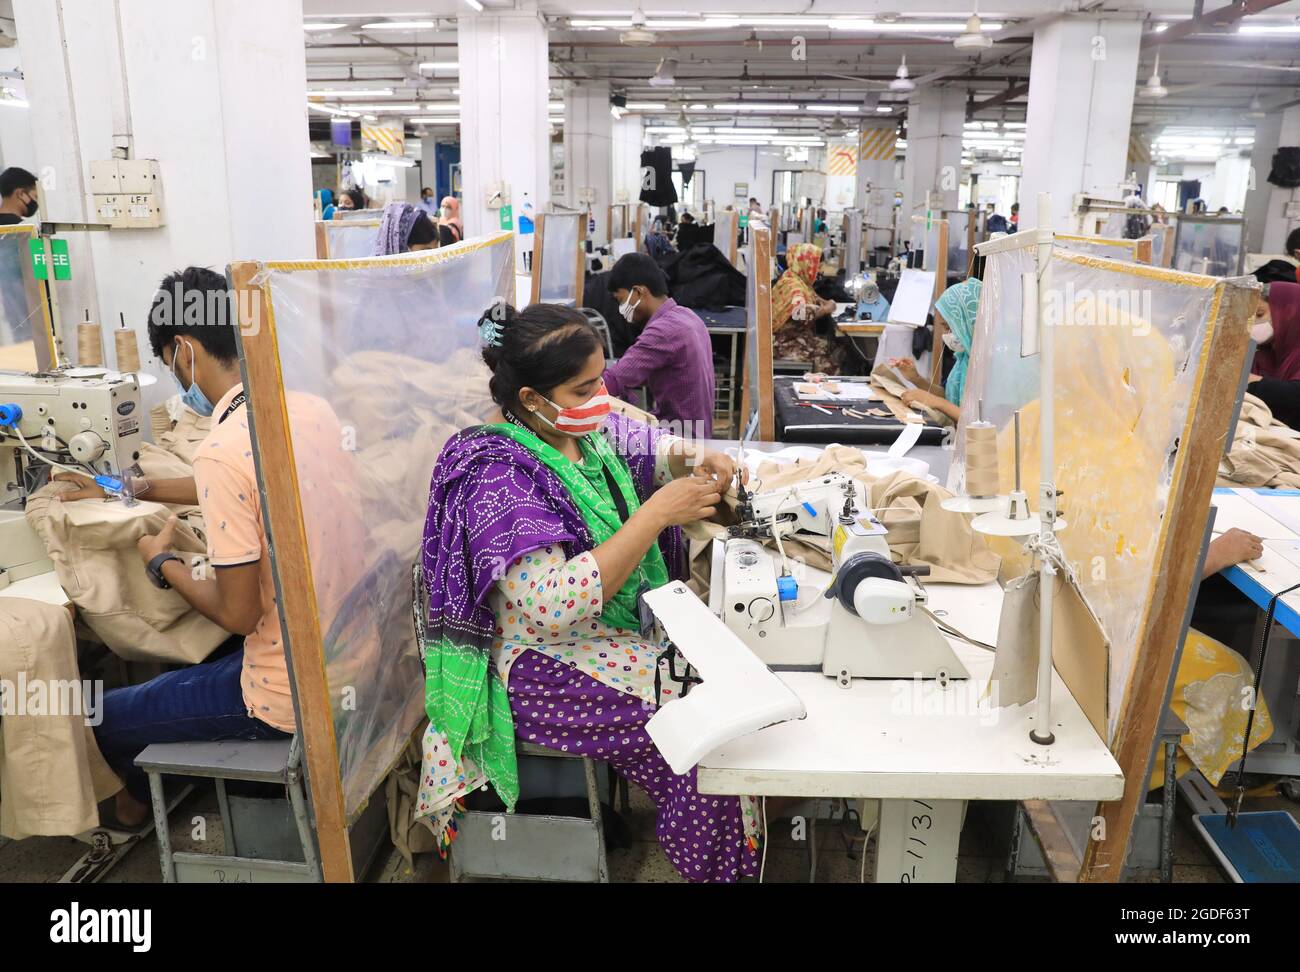 Non Exclusive: DHAKA, BANGLADESH - AUGUST 12: A woman manufactures clothes in a textile factory in the Gazipur industrial zone on the outskirts of Dha Stock Photo